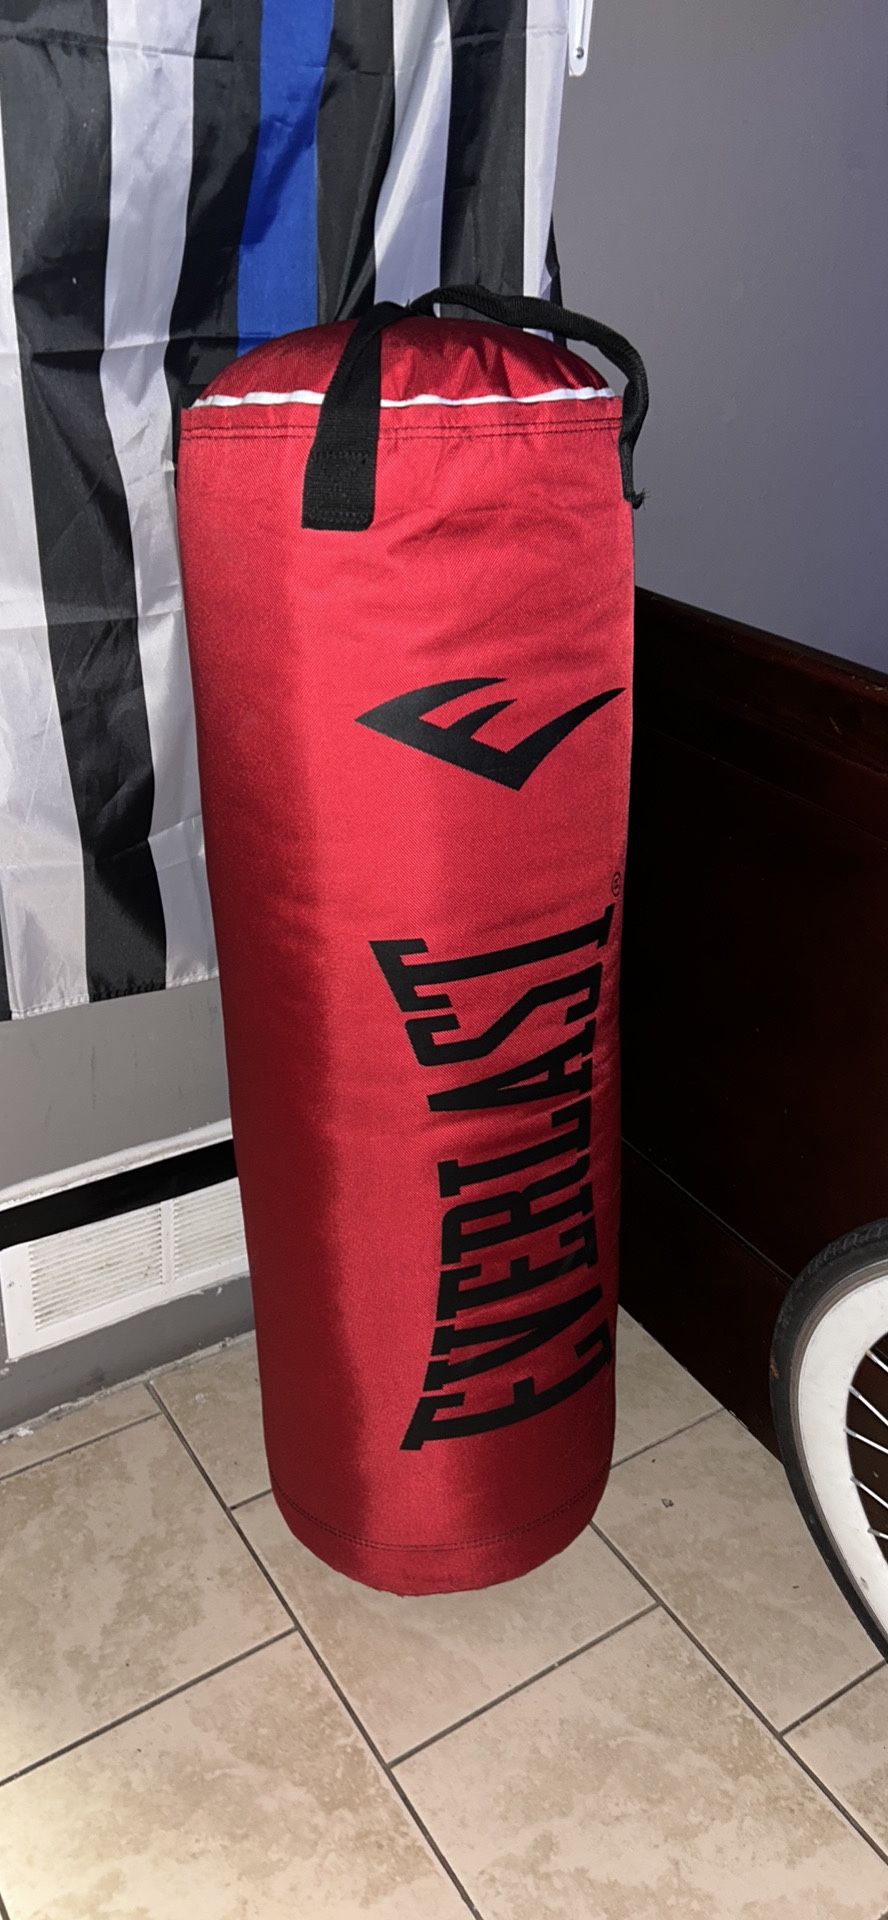 Everlast Punching Bag 75lbs With Speed Bag